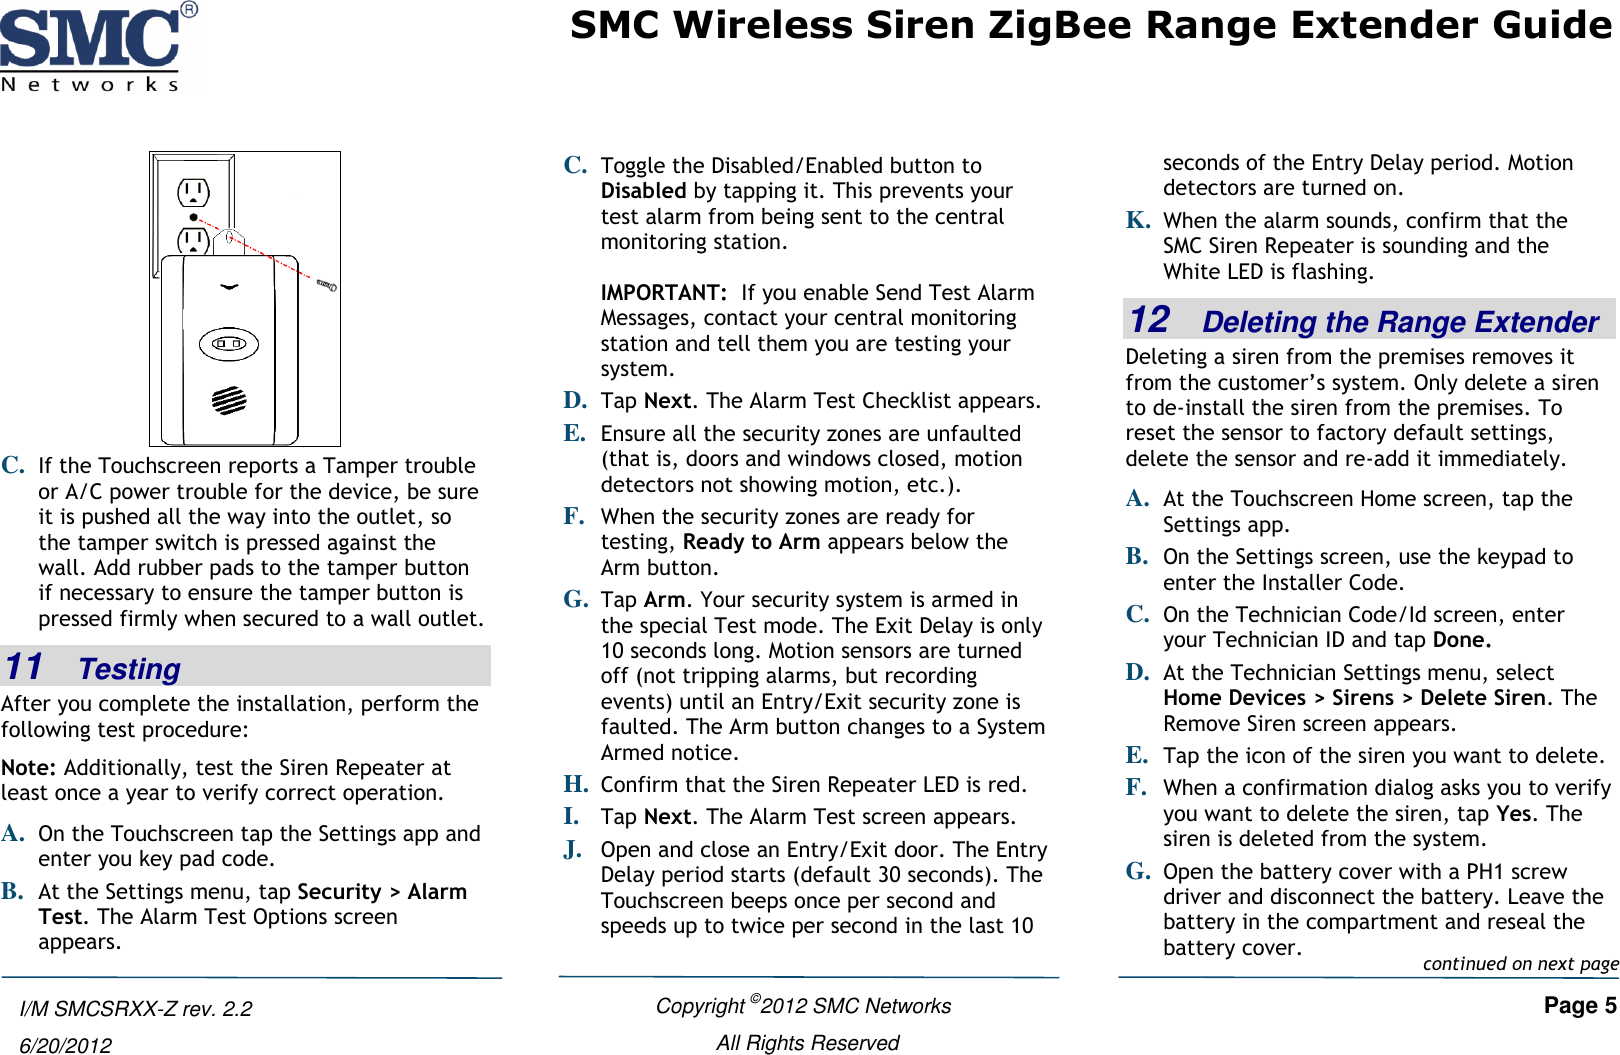 SMC Wireless Siren ZigBee Range Extender Guide    Copyright ©2012 SMC Networks   Page 5 All Rights Reserved  I/M SMCSRXX-Z rev. 2.2 6/20/2012  C. If the Touchscreen reports a Tamper trouble or A/C power trouble for the device, be sure it is pushed all the way into the outlet, so the tamper switch is pressed against the wall. Add rubber pads to the tamper button if necessary to ensure the tamper button is pressed firmly when secured to a wall outlet. 11   Testing After you complete the installation, perform the following test procedure: Note: Additionally, test the Siren Repeater at least once a year to verify correct operation. A. On the Touchscreen tap the Settings app and enter you key pad code. B. At the Settings menu, tap Security &gt; Alarm Test. The Alarm Test Options screen appears. C. Toggle the Disabled/Enabled button to Disabled by tapping it. This prevents your test alarm from being sent to the central monitoring station.  IMPORTANT:  If you enable Send Test Alarm Messages, contact your central monitoring station and tell them you are testing your system. D. Tap Next. The Alarm Test Checklist appears. E. Ensure all the security zones are unfaulted (that is, doors and windows closed, motion detectors not showing motion, etc.). F. When the security zones are ready for testing, Ready to Arm appears below the Arm button.  G. Tap Arm. Your security system is armed in the special Test mode. The Exit Delay is only 10 seconds long. Motion sensors are turned off (not tripping alarms, but recording events) until an Entry/Exit security zone is faulted. The Arm button changes to a System Armed notice. H. Confirm that the Siren Repeater LED is red. I. Tap Next. The Alarm Test screen appears. J. Open and close an Entry/Exit door. The Entry Delay period starts (default 30 seconds). The Touchscreen beeps once per second and speeds up to twice per second in the last 10 seconds of the Entry Delay period. Motion detectors are turned on. K. When the alarm sounds, confirm that the SMC Siren Repeater is sounding and the White LED is flashing. 12   Deleting the Range Extender Deleting a siren from the premises removes it from the customer’s system. Only delete a siren to de-install the siren from the premises. To reset the sensor to factory default settings, delete the sensor and re-add it immediately. A. At the Touchscreen Home screen, tap the Settings app. B. On the Settings screen, use the keypad to enter the Installer Code.  C. On the Technician Code/Id screen, enter your Technician ID and tap Done. D. At the Technician Settings menu, select Home Devices &gt; Sirens &gt; Delete Siren. The Remove Siren screen appears. E. Tap the icon of the siren you want to delete.  F. When a confirmation dialog asks you to verify you want to delete the siren, tap Yes. The siren is deleted from the system.  G. Open the battery cover with a PH1 screw driver and disconnect the battery. Leave the battery in the compartment and reseal the battery cover.  continued on next page 